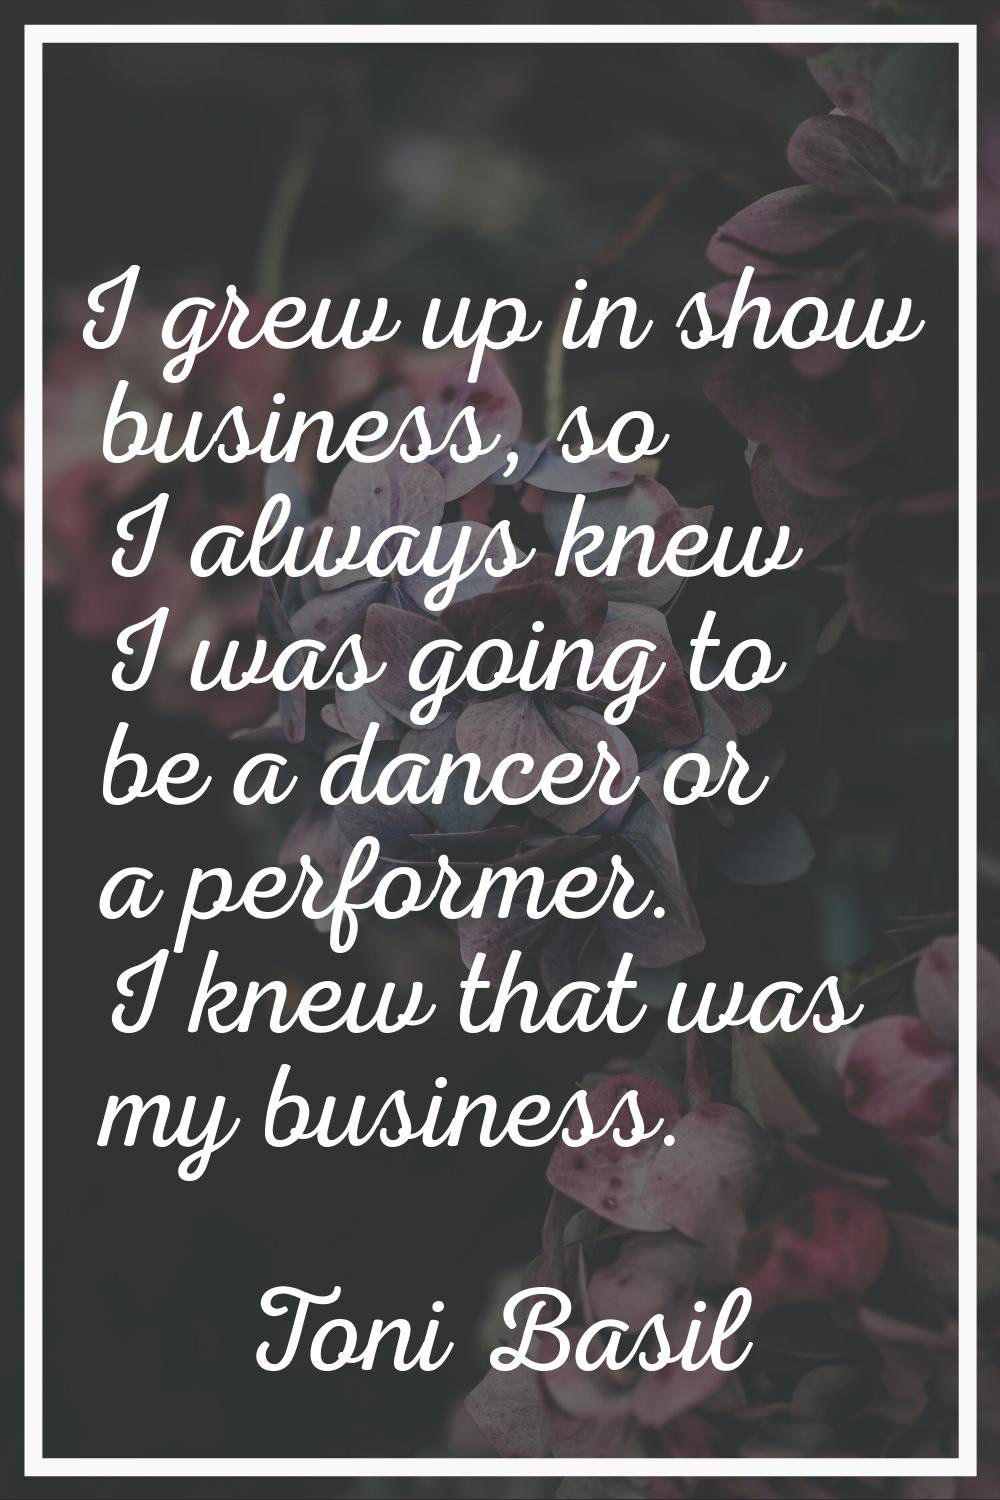 I grew up in show business, so I always knew I was going to be a dancer or a performer. I knew that